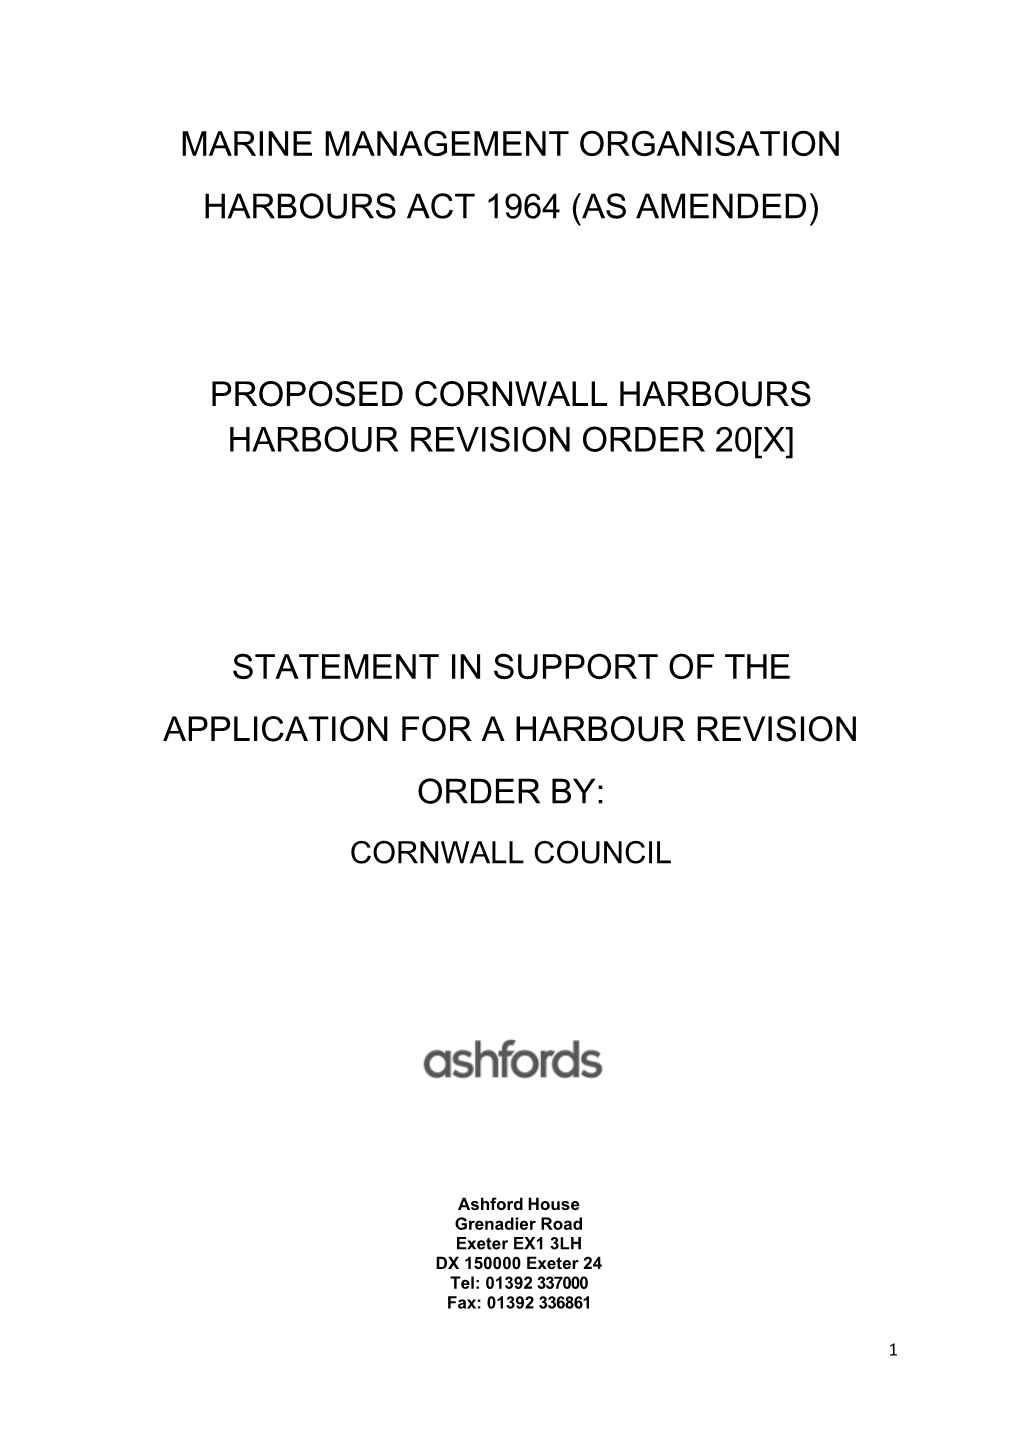 Marine Management Organisation Harbours Act 1964 (As Amended)